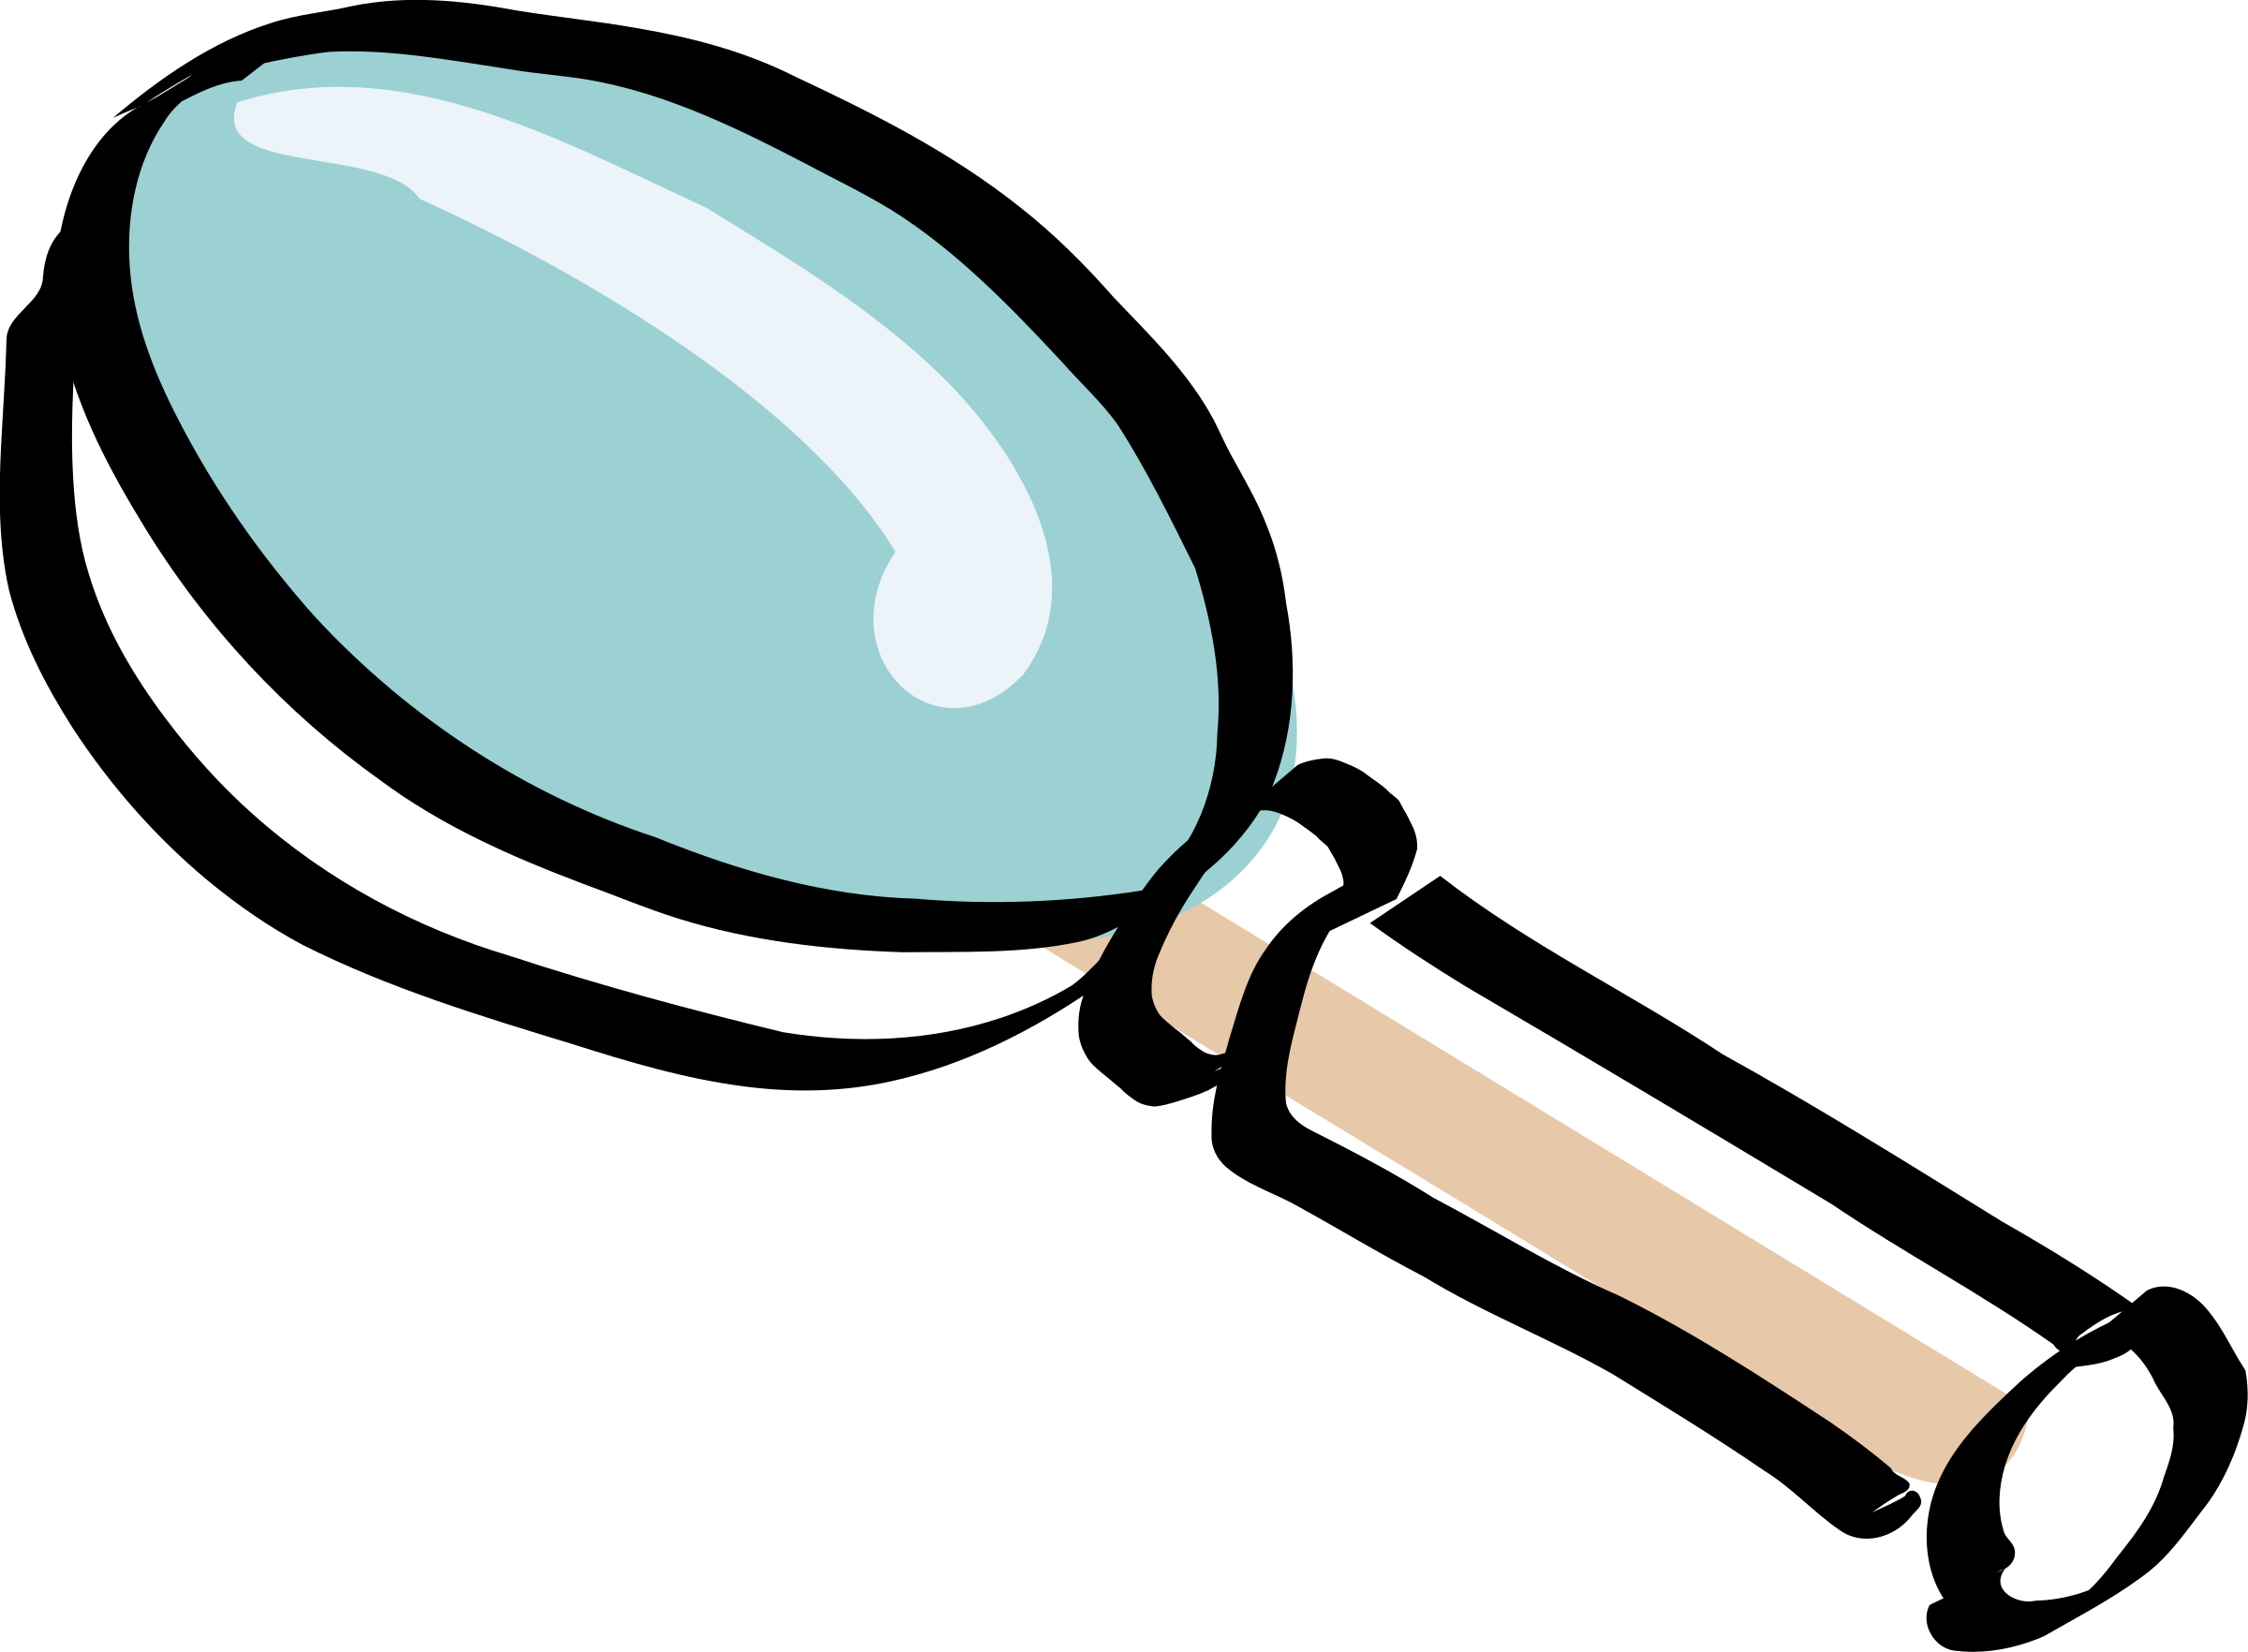 Detective with magnifying glass. Hand clipart lense